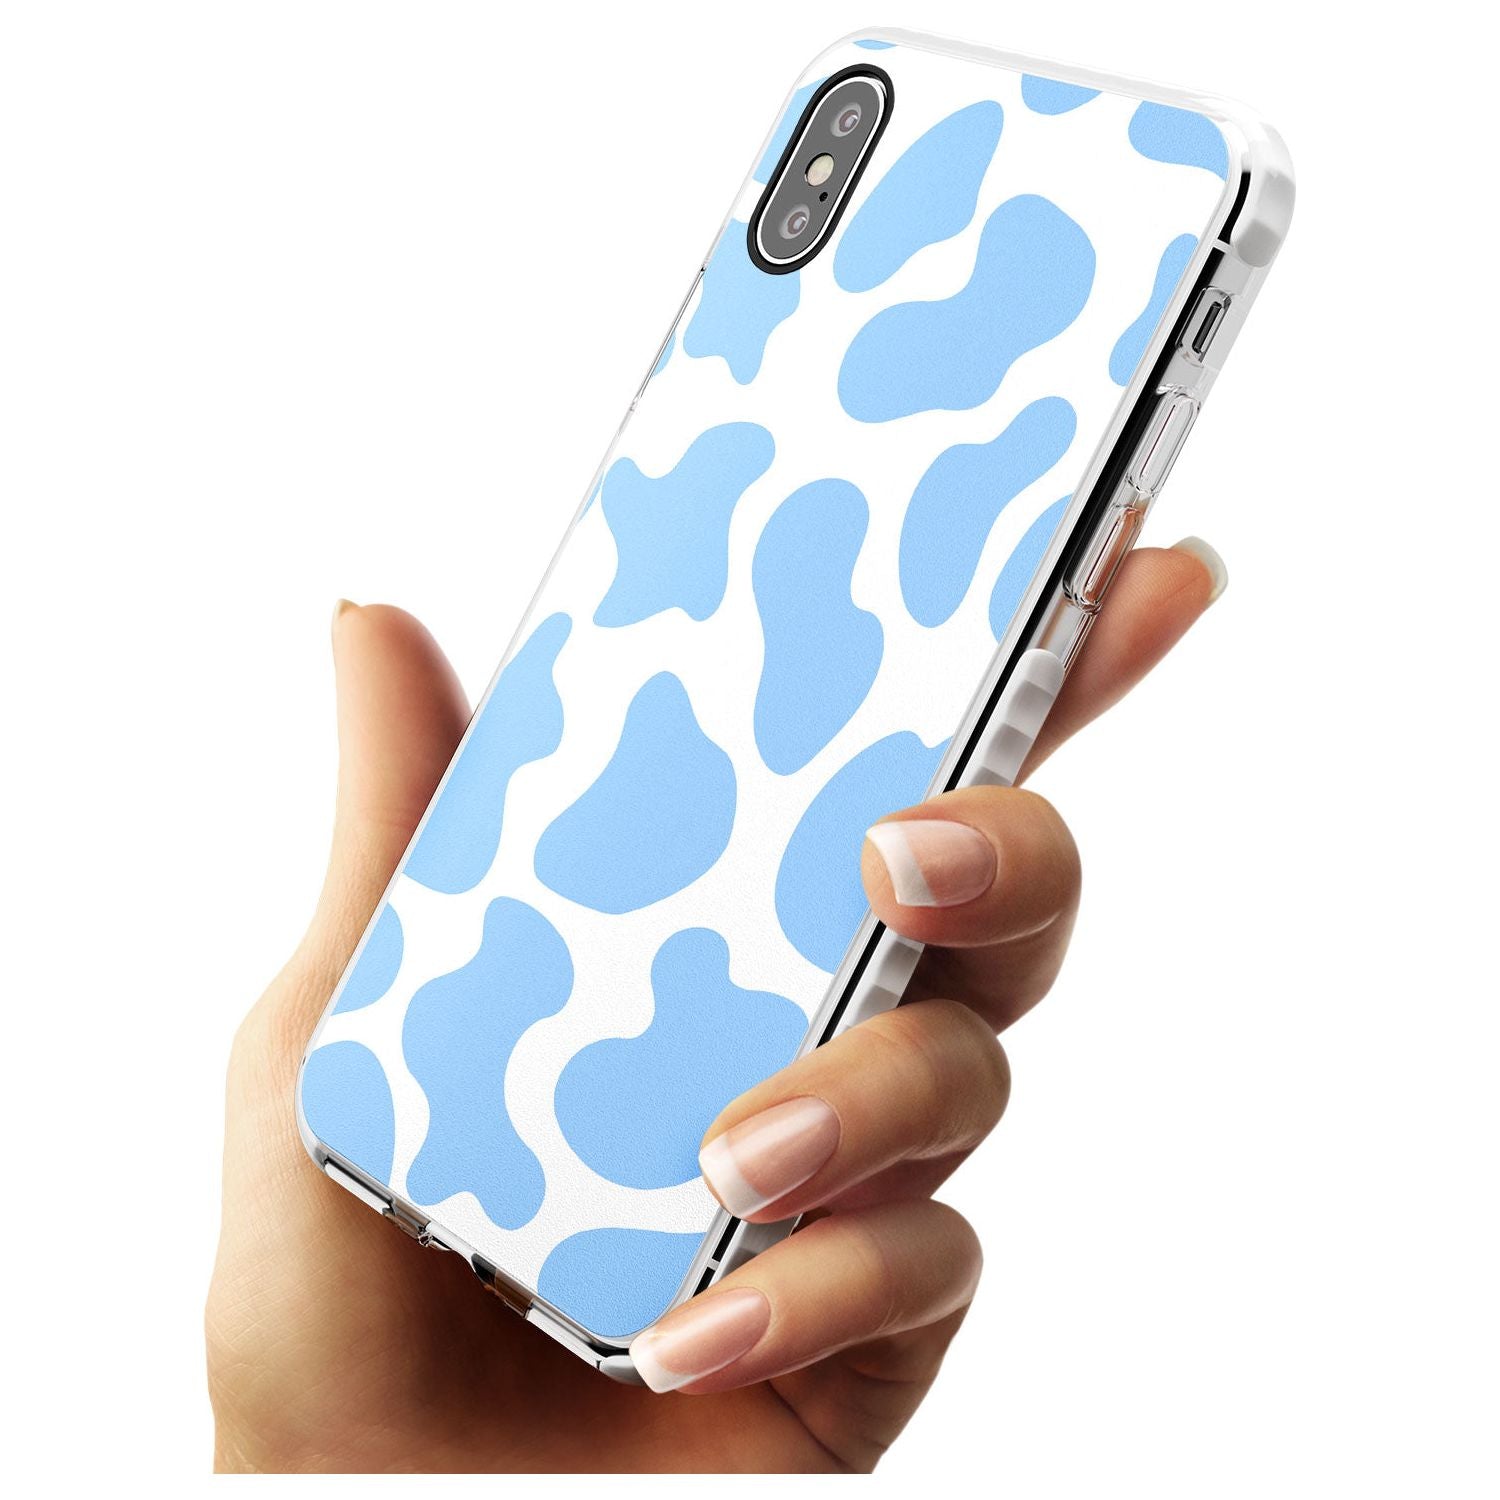 Blue and White Cow Print Impact Phone Case for iPhone X XS Max XR